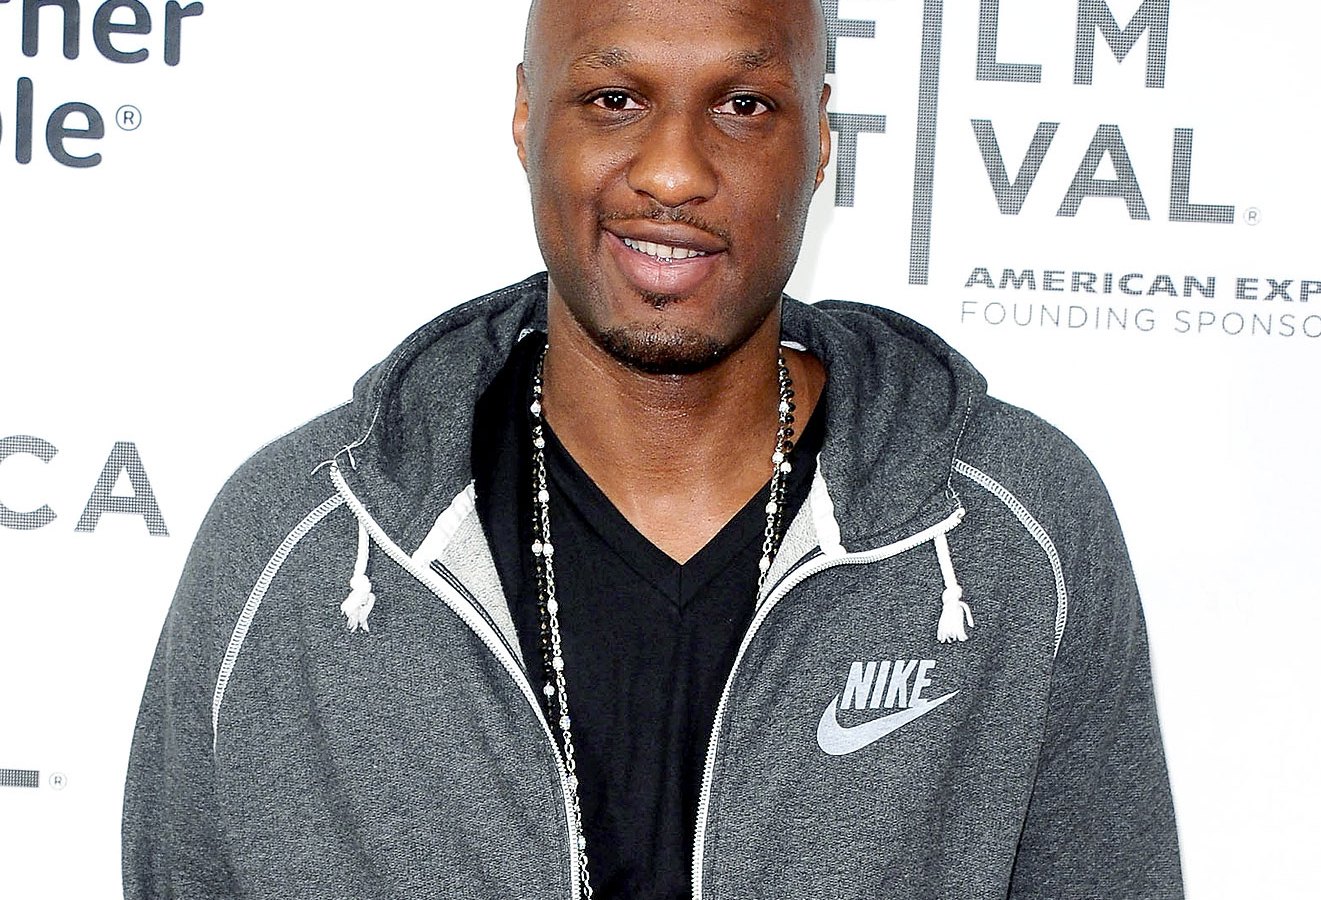 Lamar Odom, pictured April 2012, was arrested on DUI Aug 30